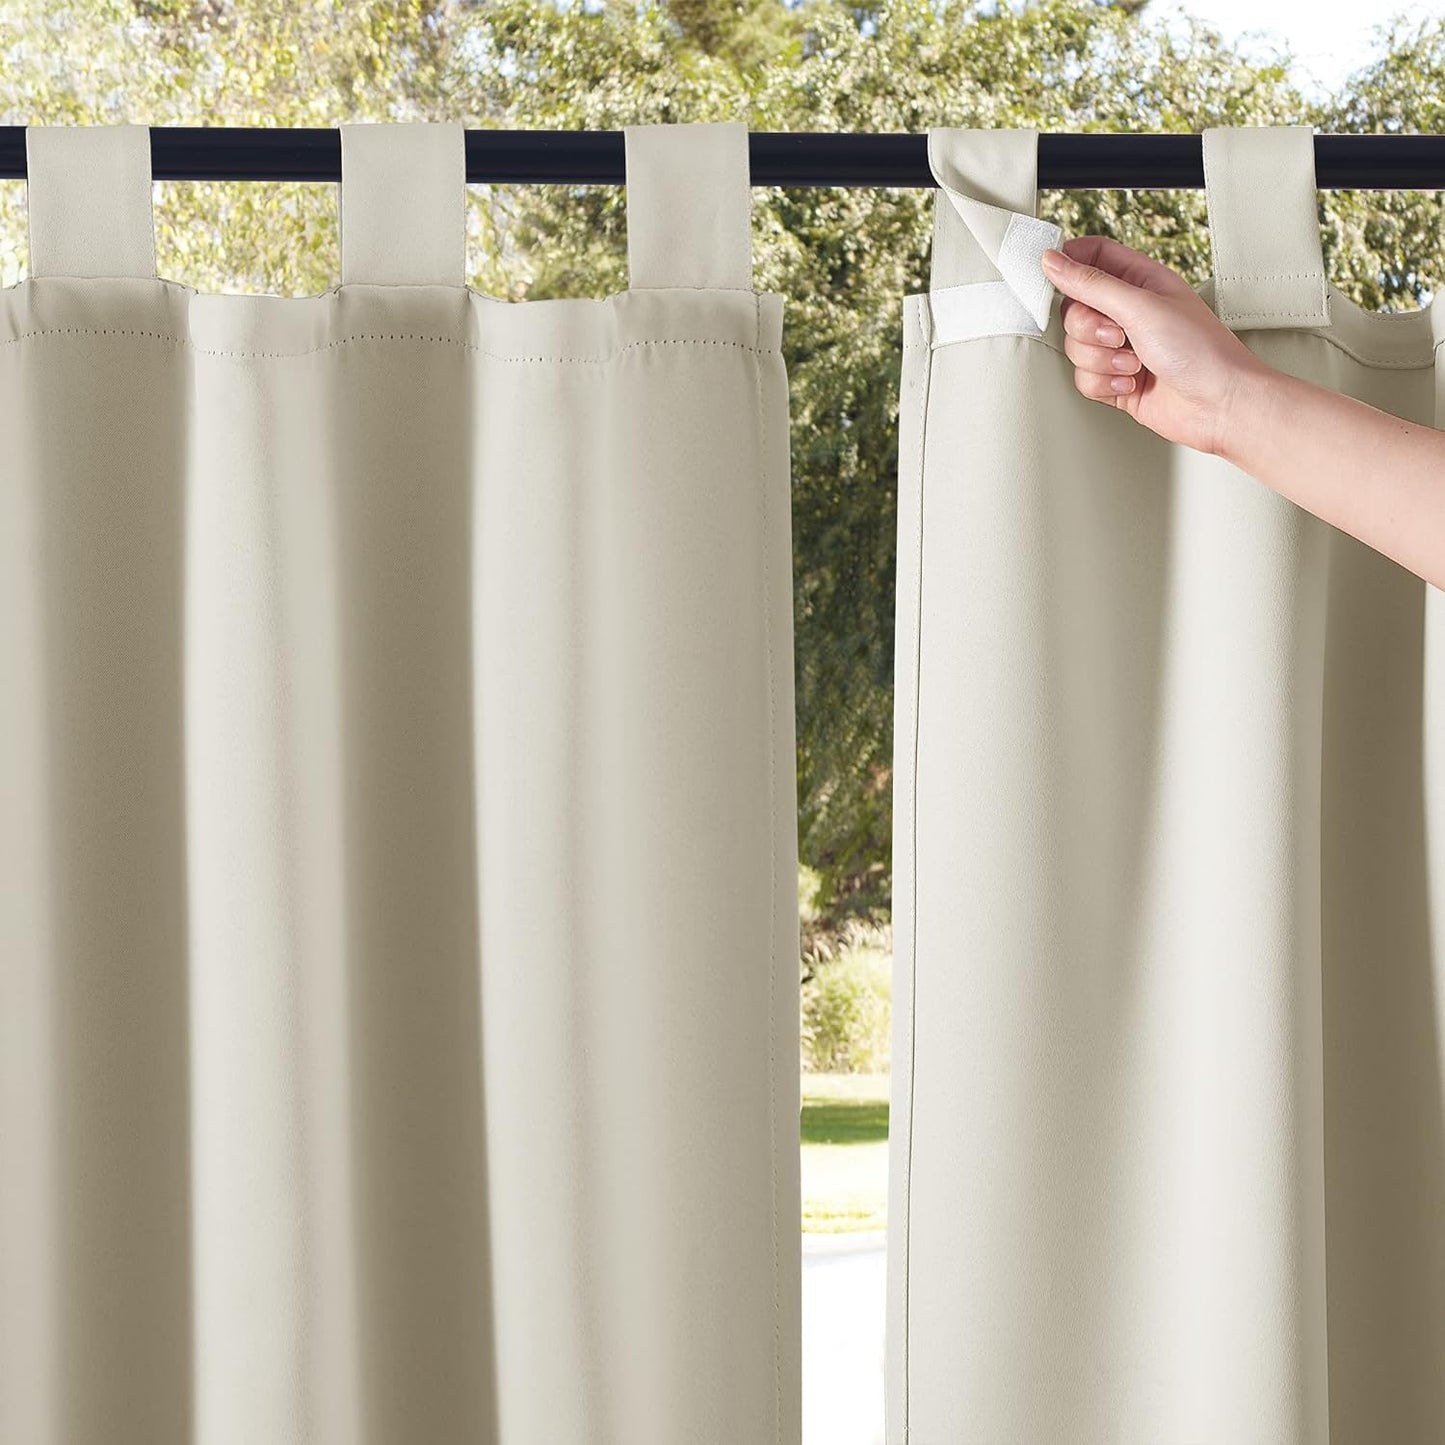 NICETOWN 2 Panels Outdoor Patio Curtainss Waterproof Room Darkening Drapes, Detachable Sticky Tab Top Thermal Insulated Privacy Outdoor Dividers for Porch/Doorway, Biscotti Beige, W52 X L84  NICETOWN Beige W52 X L95 